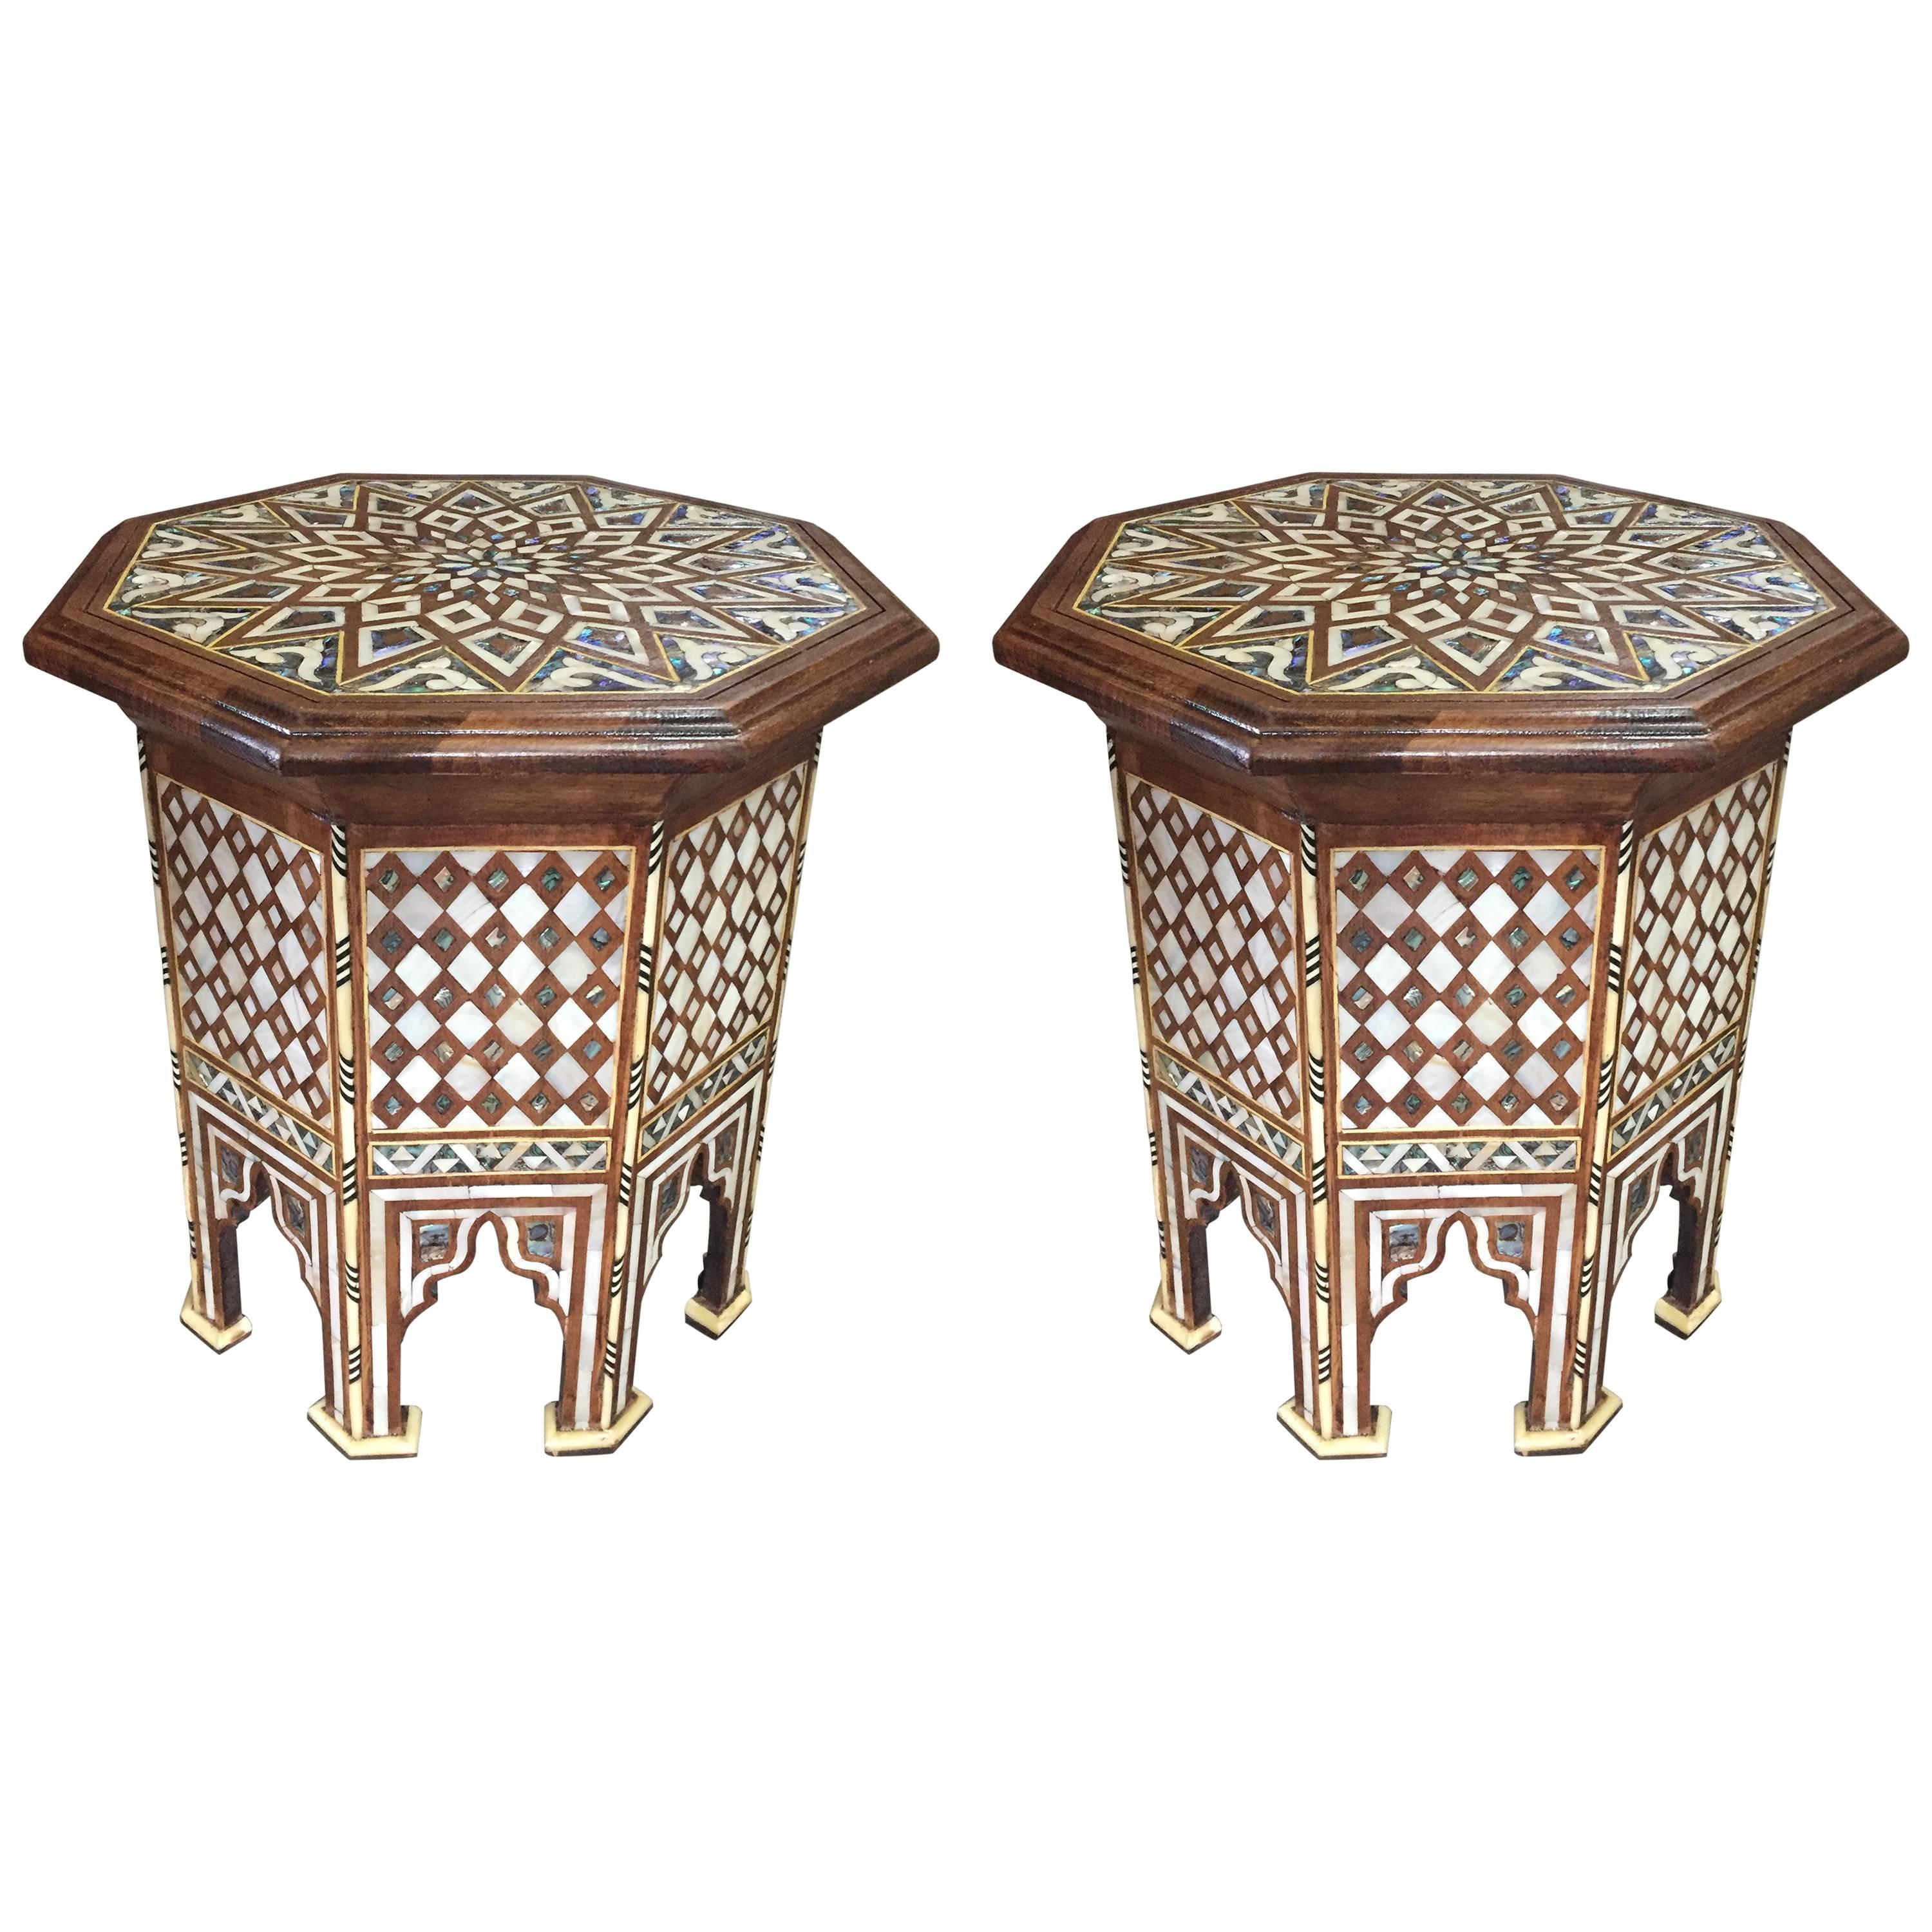 Pair of Moroccan Abalone and Mother-of-Pearl Side Tables